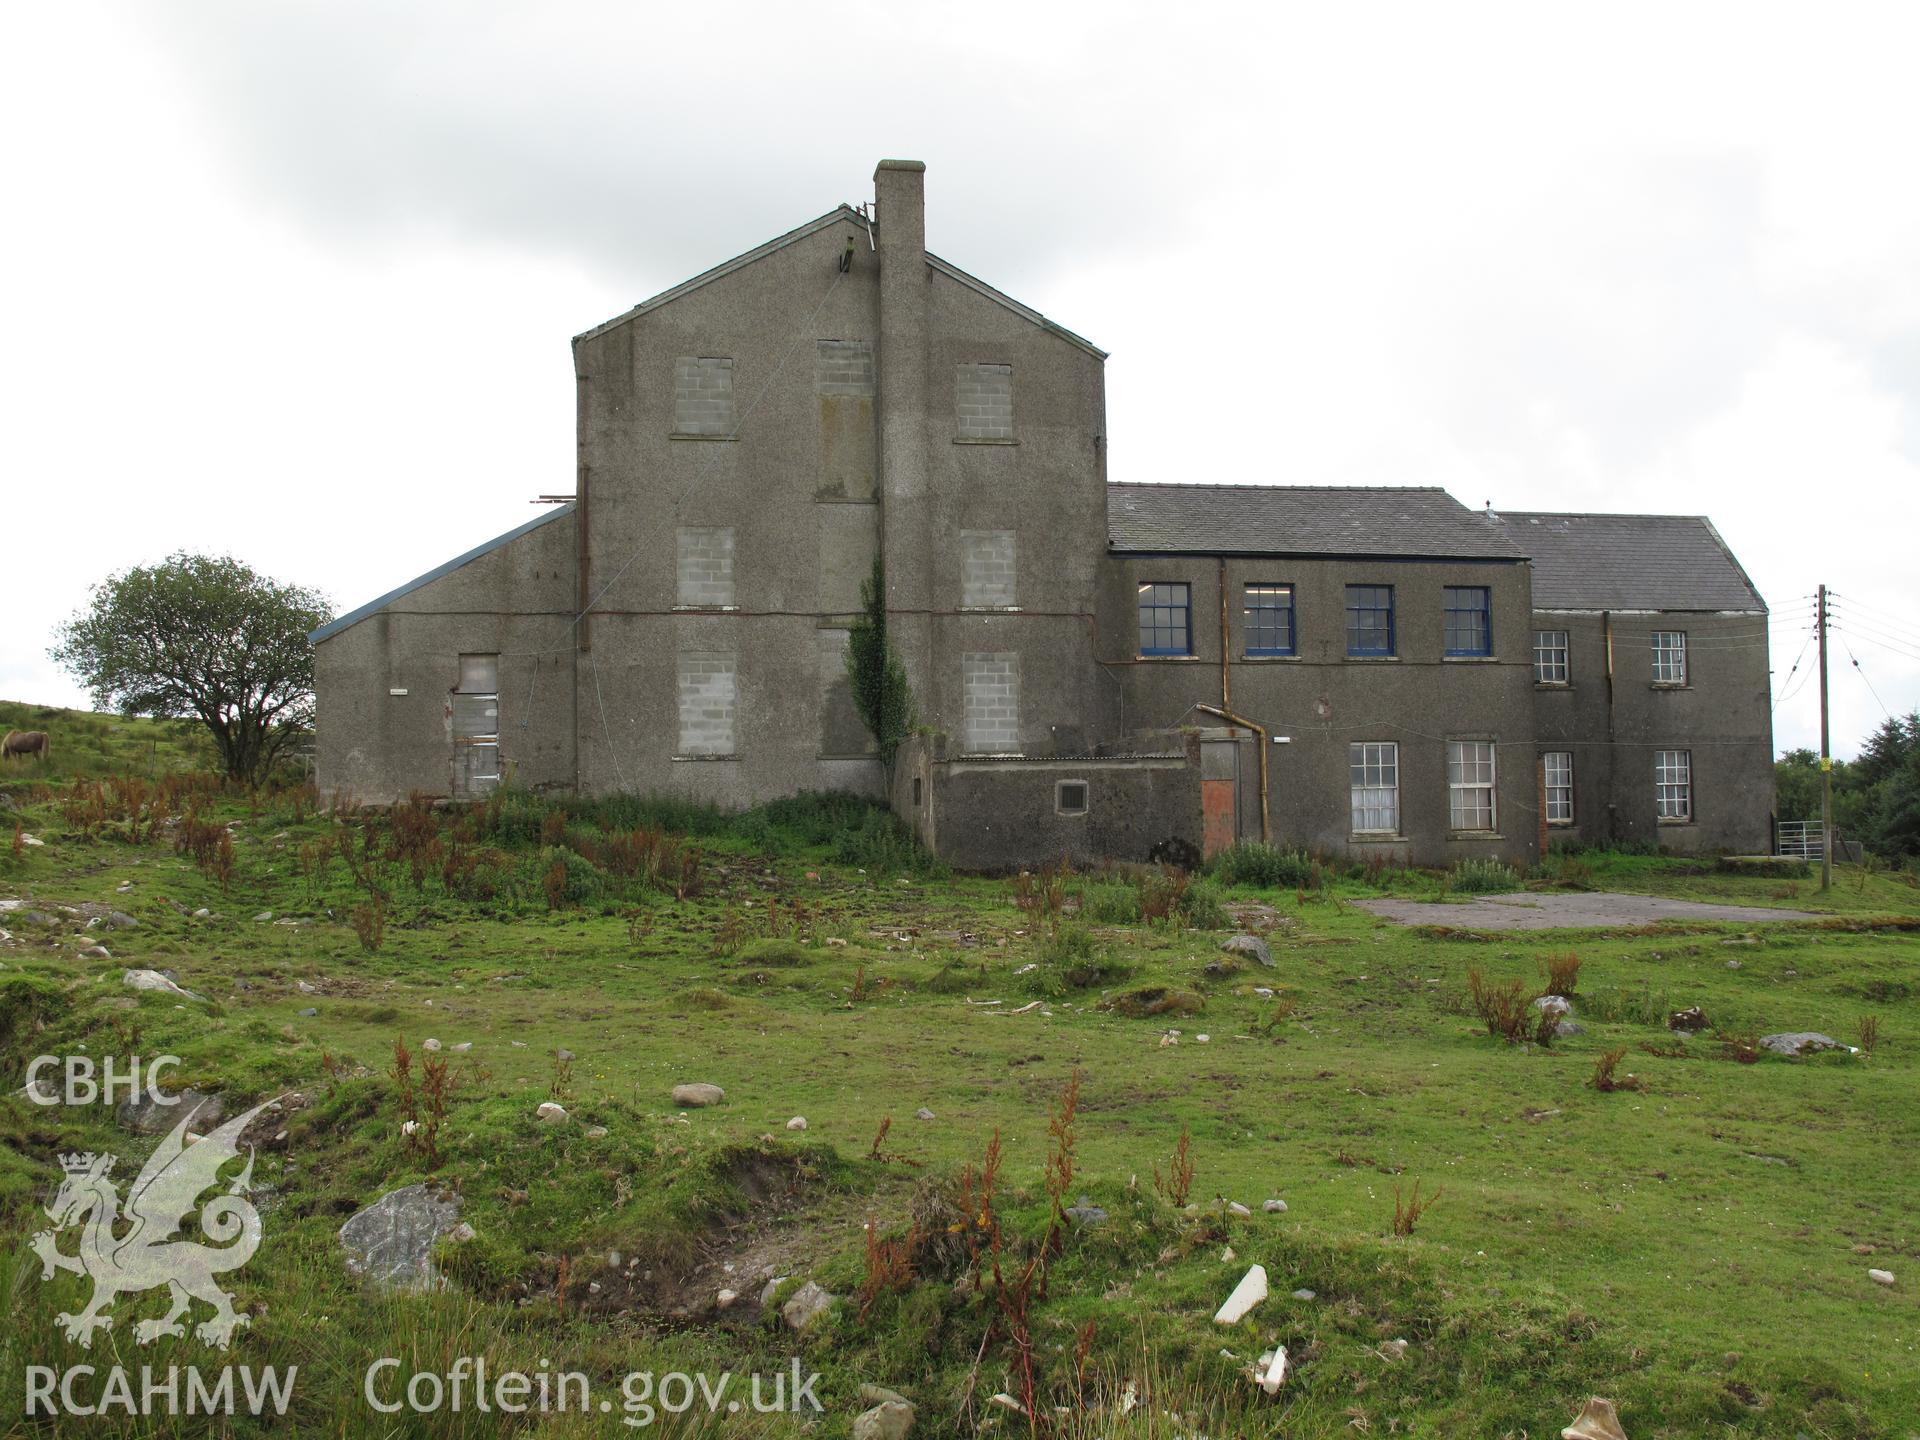 Waunfawr Radio Transmitting Station from the north, taken by Brian Malaws on 06 August 2009.